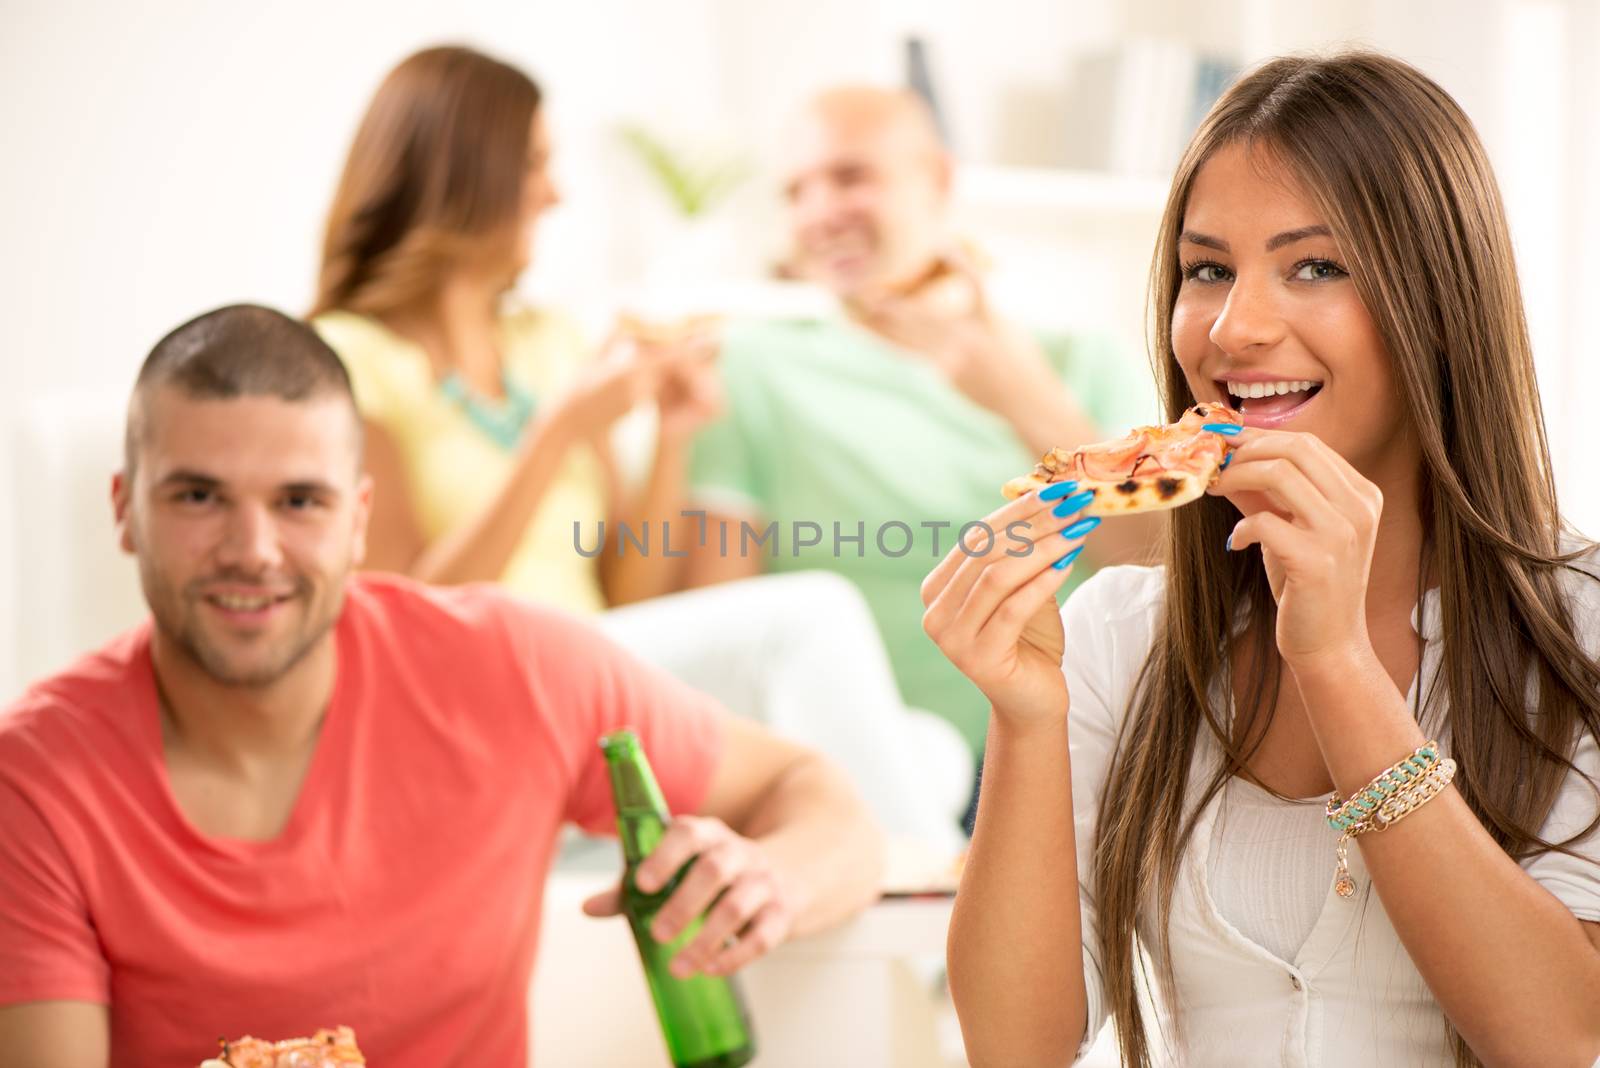 Close up of a young girl smiling and eating pizza with her friends in the background.